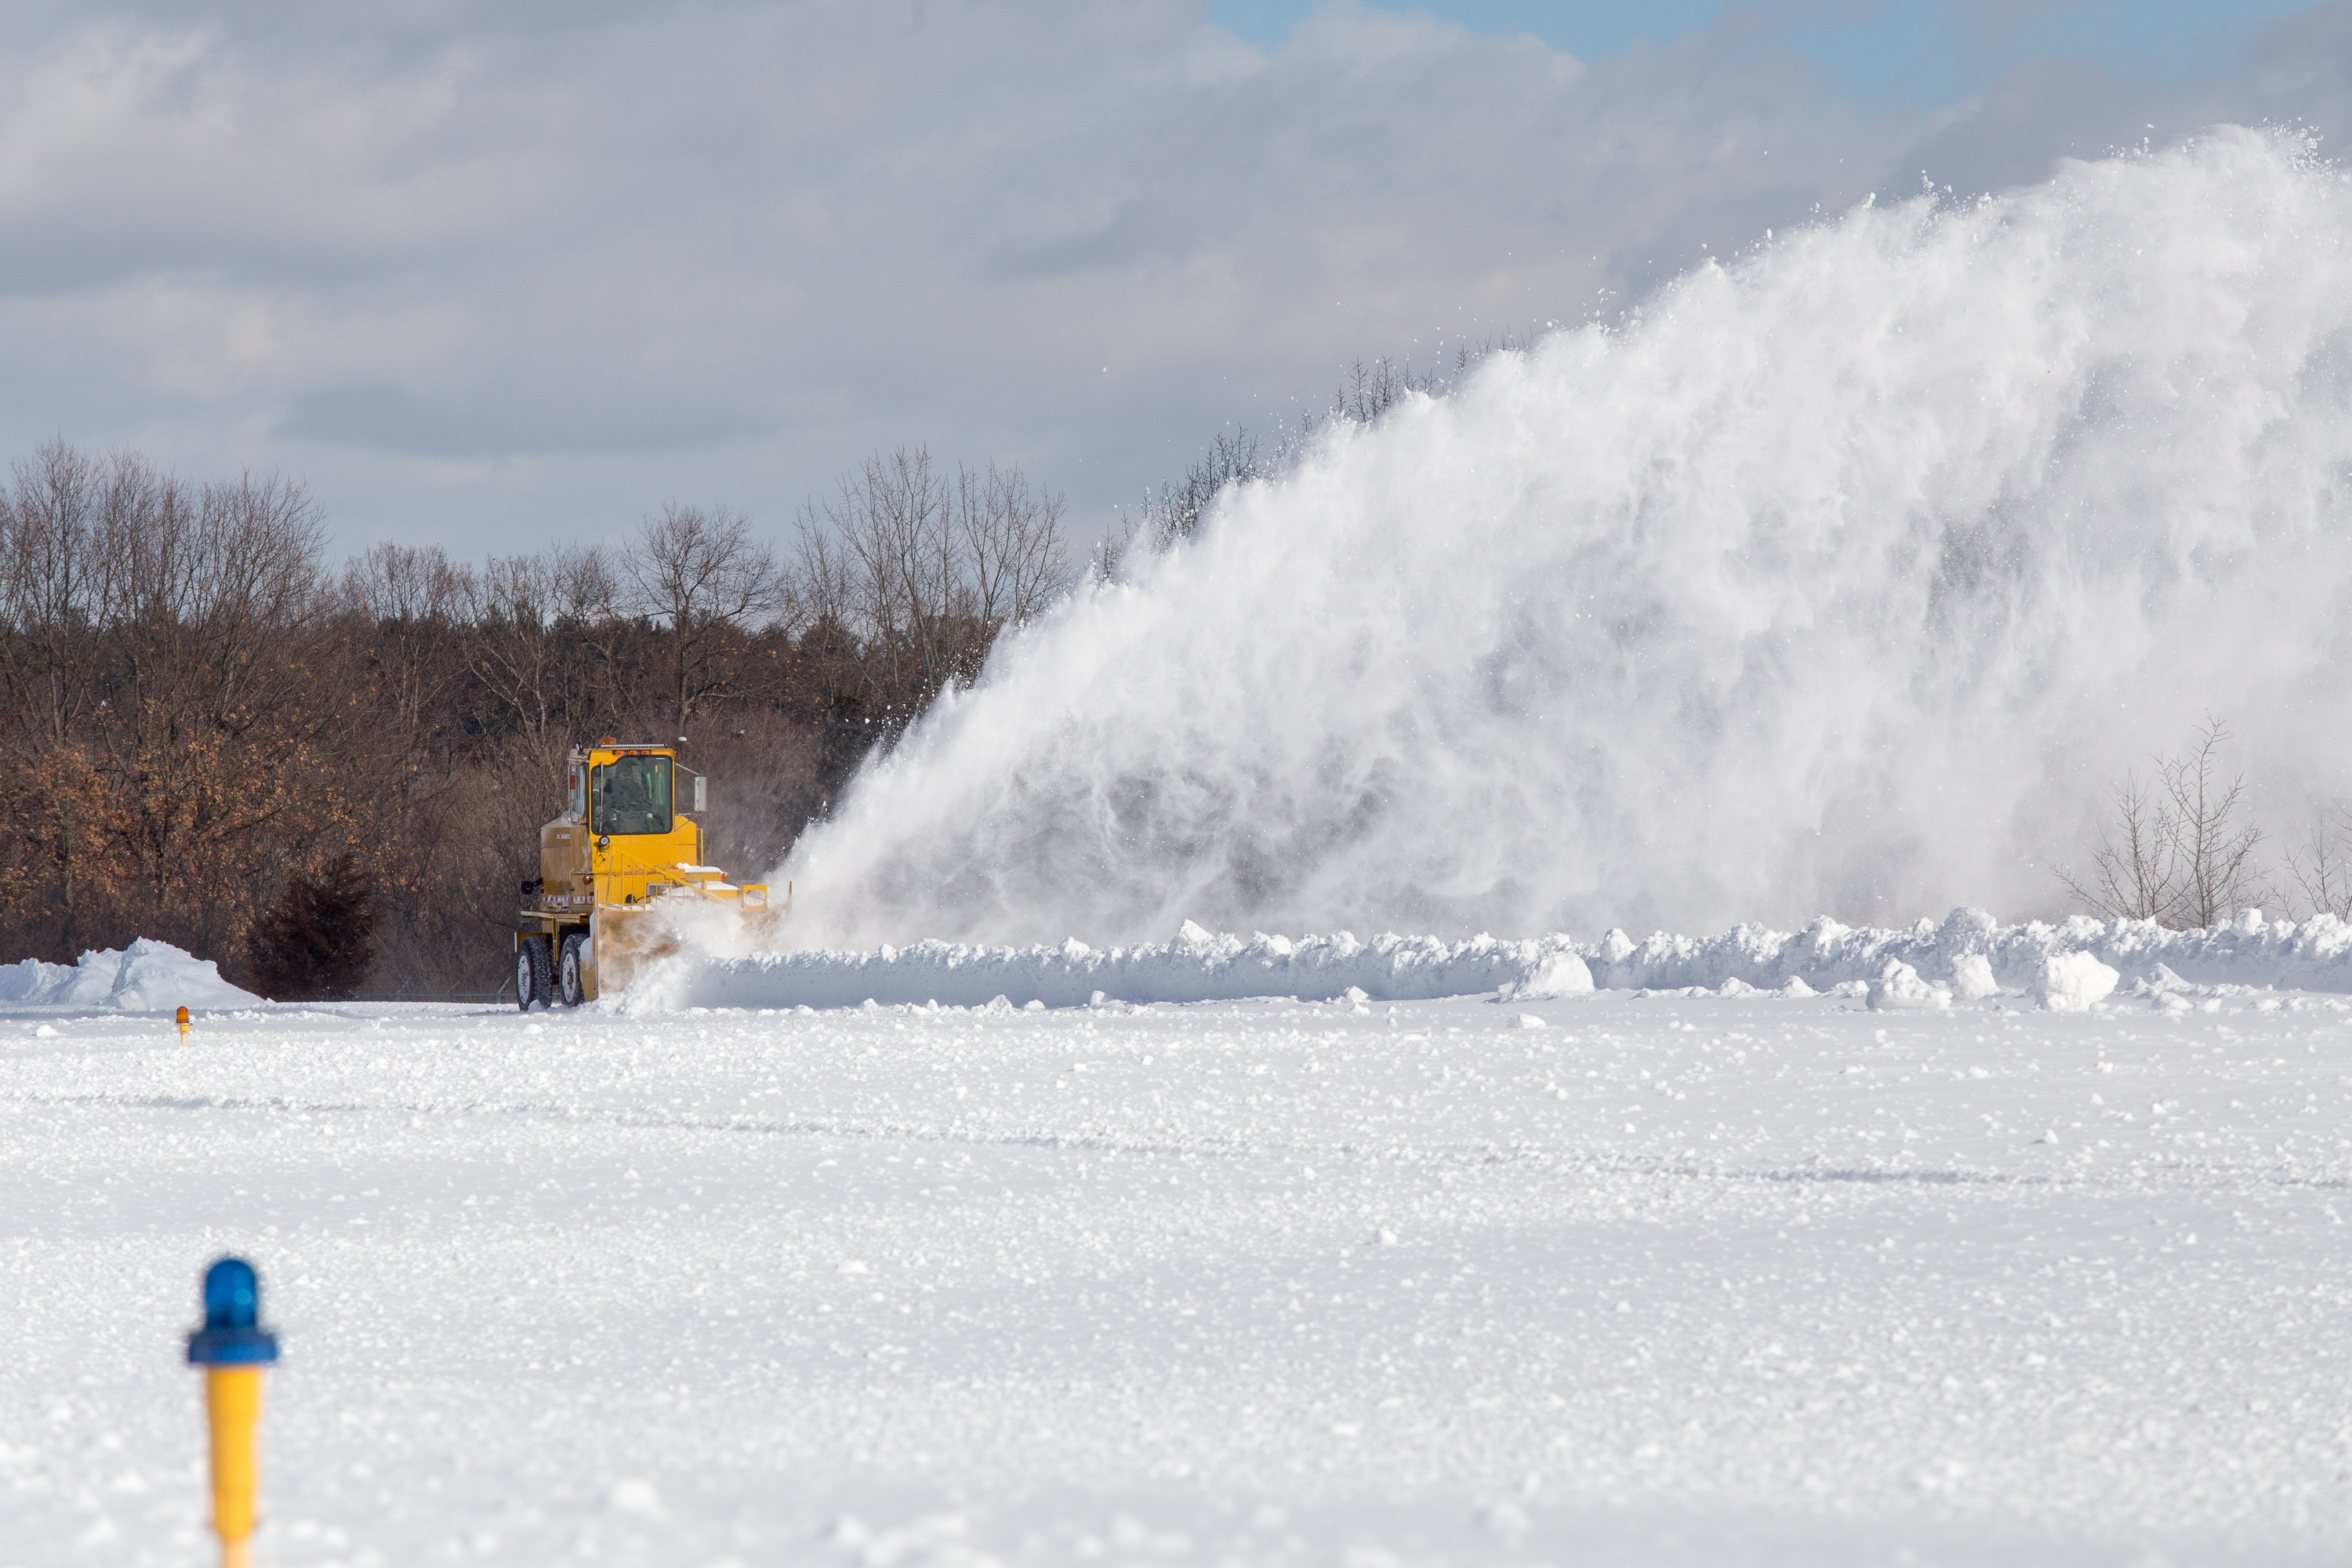 Bill O'Leary, owner of Interstate Aviation in Plainville, Connecticut, and the manager of Robertson Field, said Feb. 10 that the roughly $20,000 he spent a few years ago buying and fixing up this SMI Snowmaster has proved to be a worthwhile investment. Jim Moore photo.